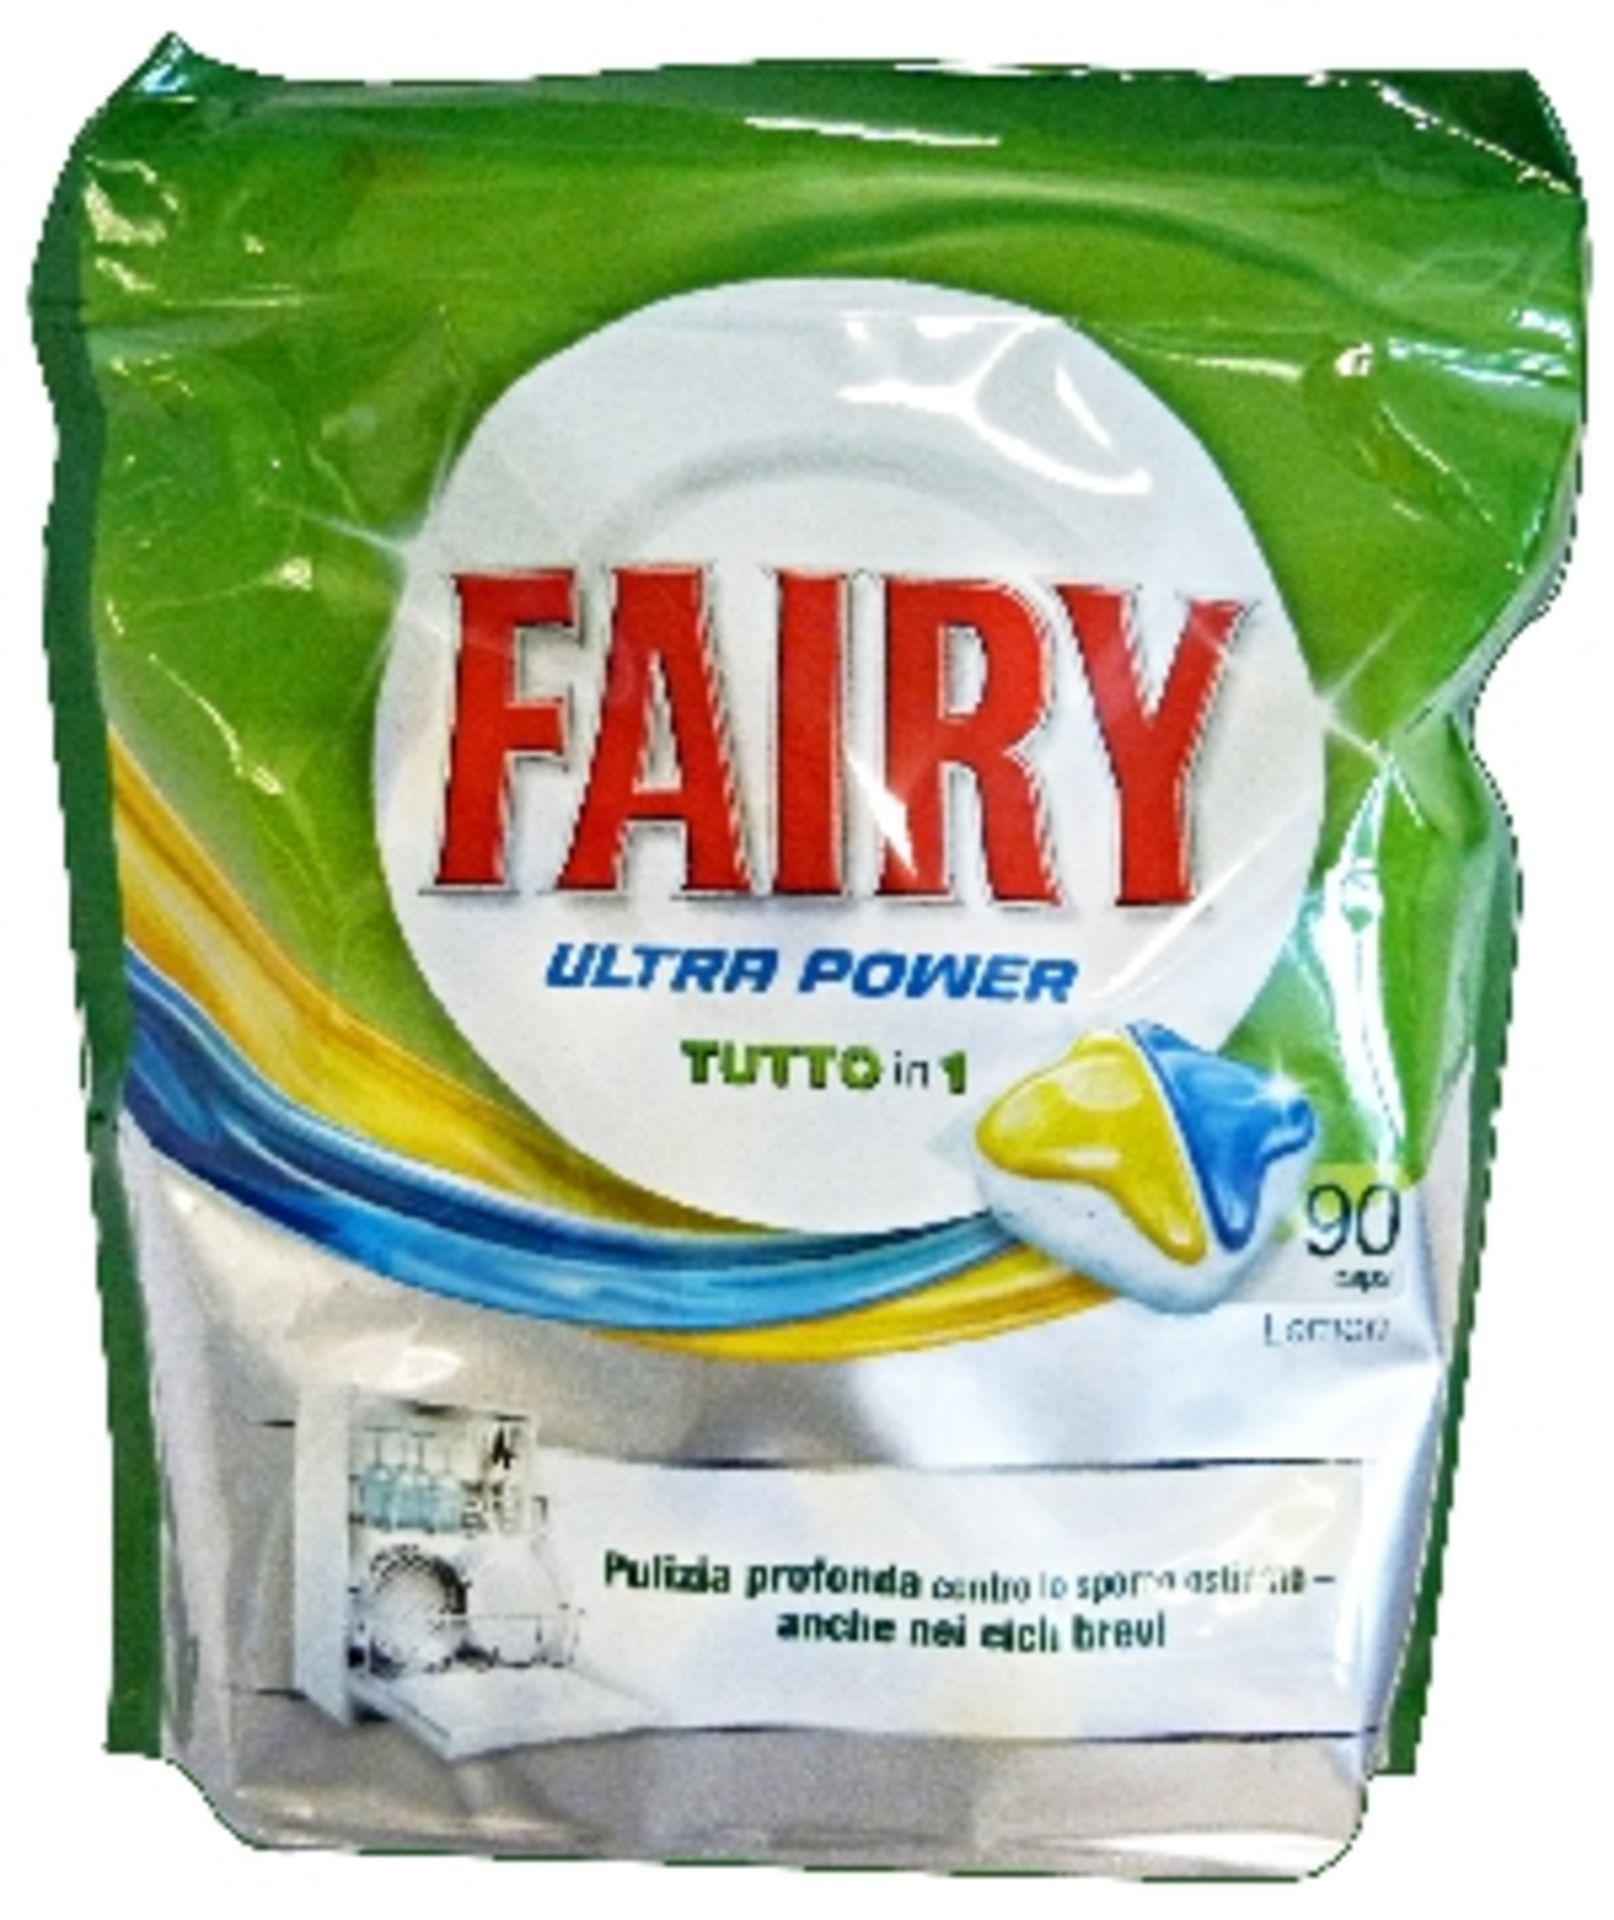 V Brand New Fairy Ultra Power All-In-One Lemon Dishwasher Tablets 90 Pack ISP£14.99 X 2 Bid price to